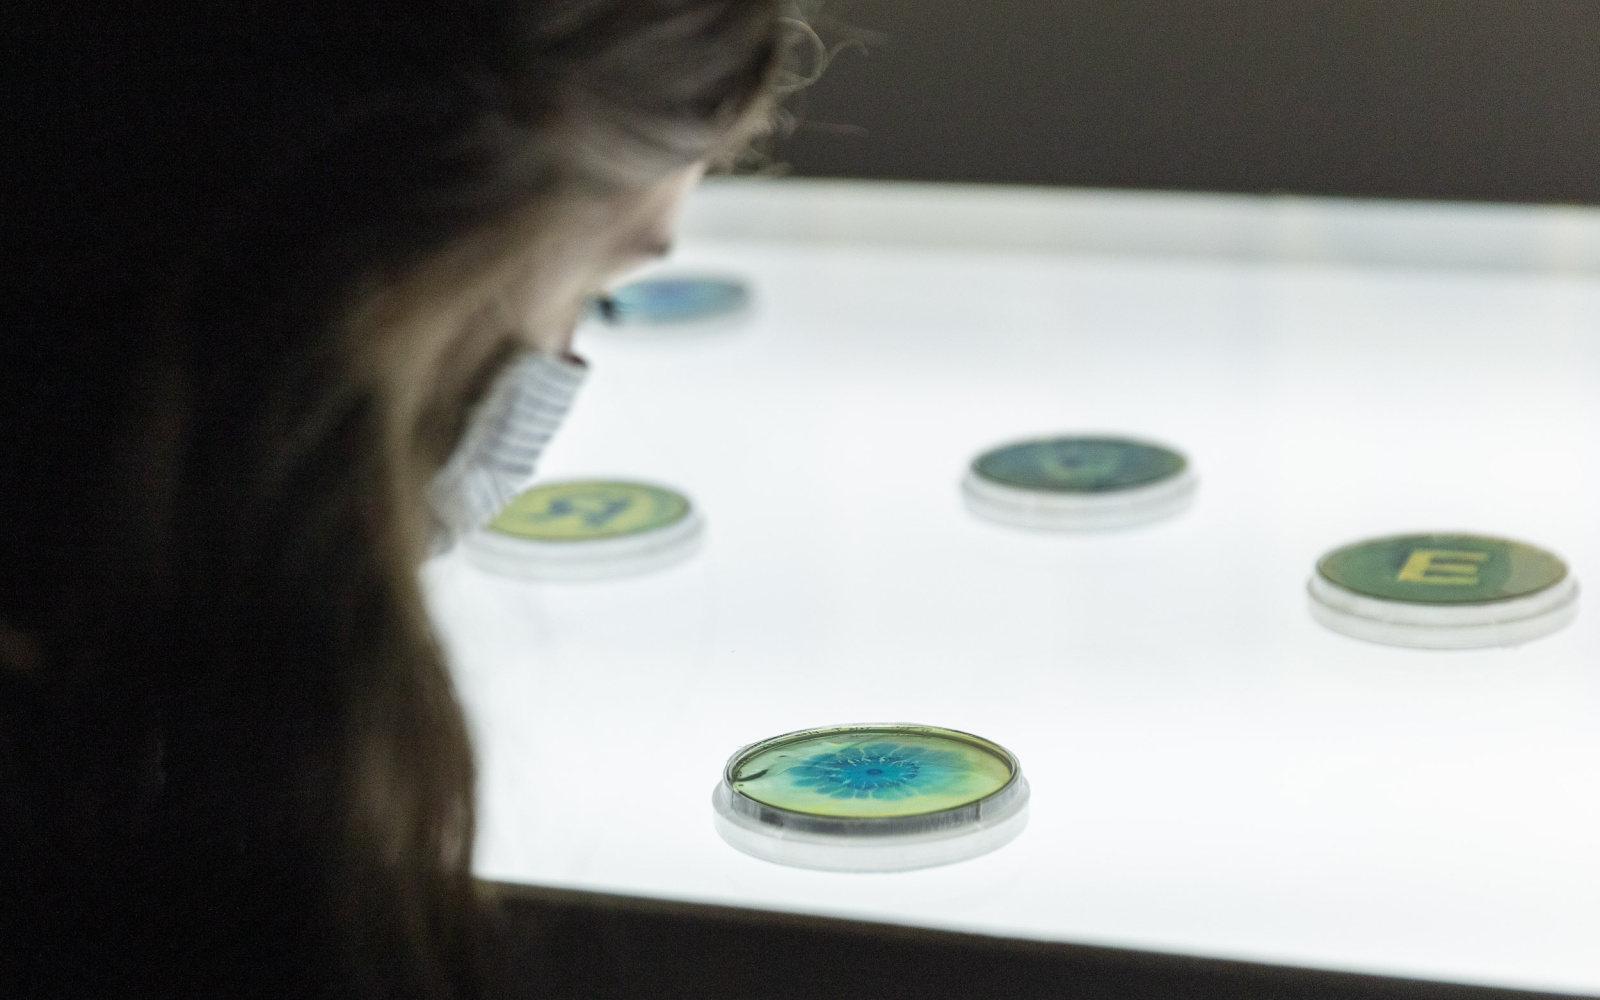 The photo shows a woman in semi-profile with a mask due to COVID-19 measures. She is looking at a colorful petri dish with her head bent towards the display case. 